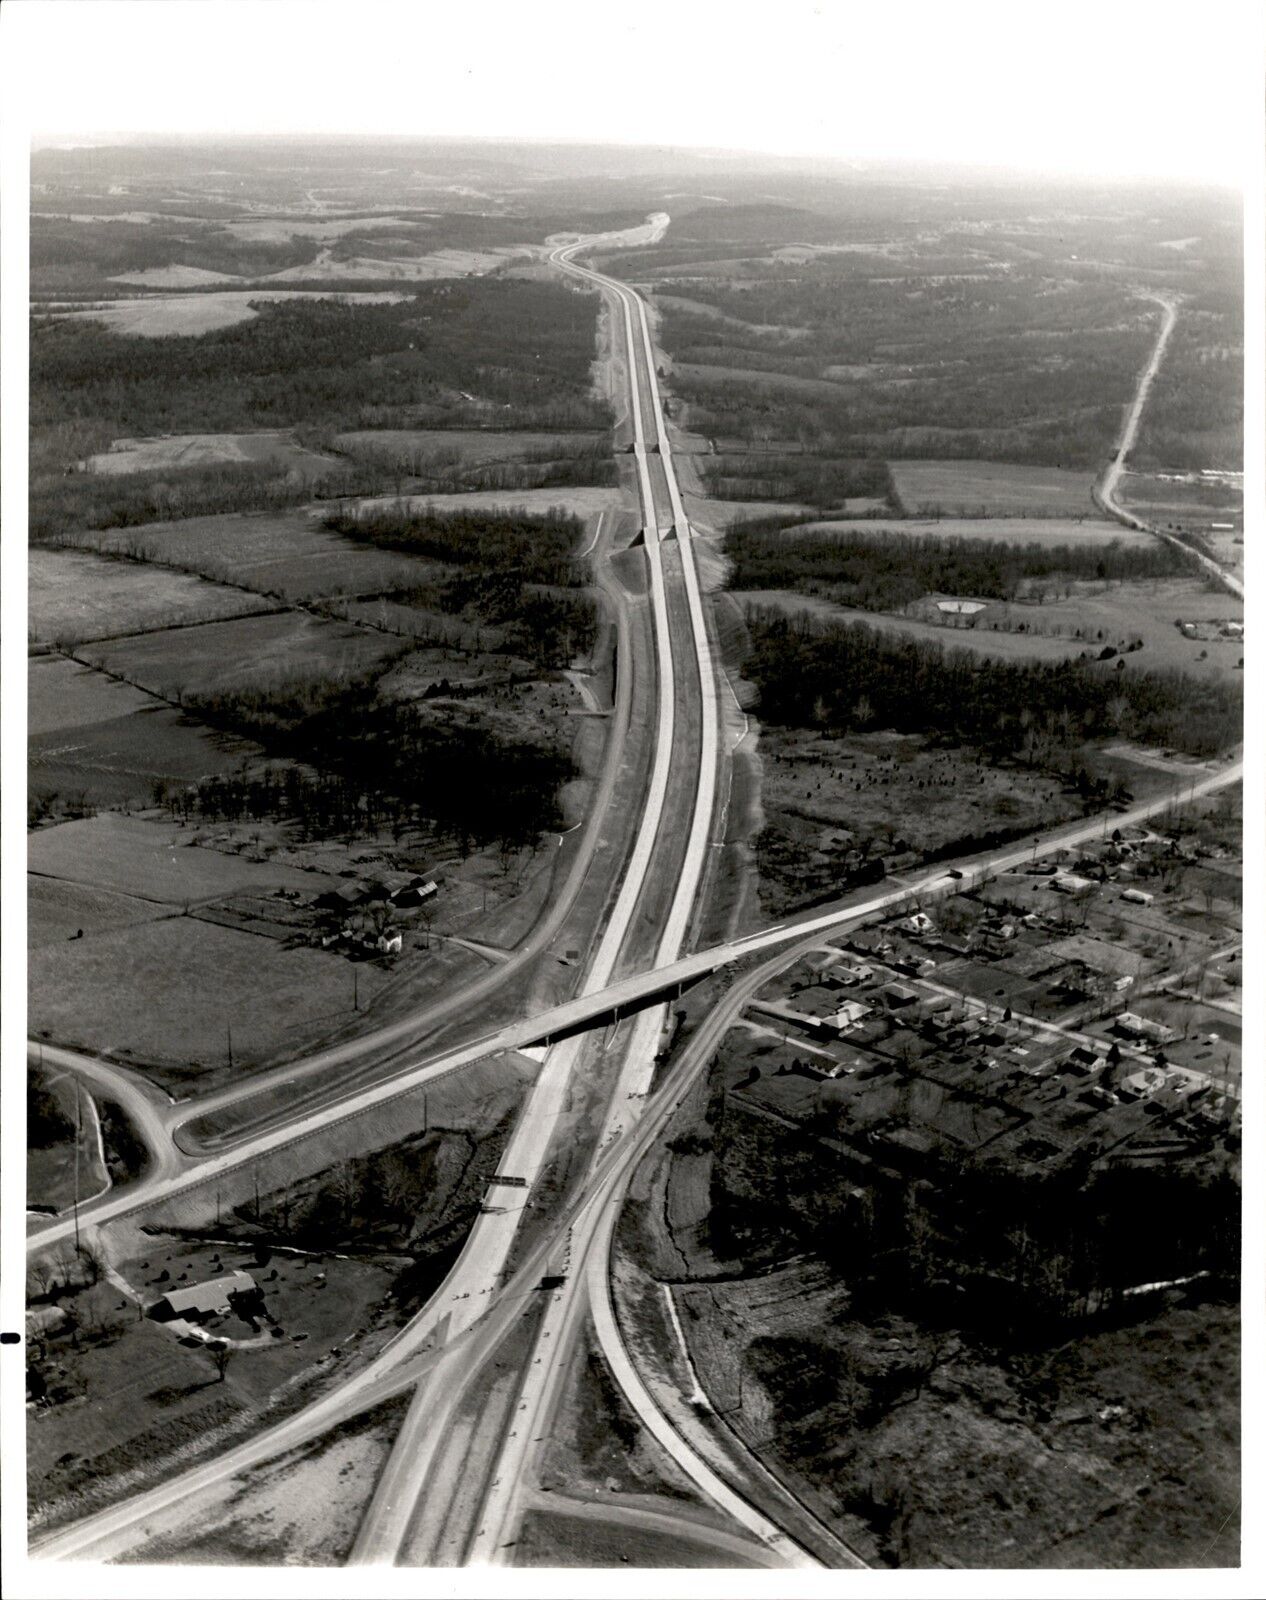 LG23 Original Photo MISSOURI HIGHWAY OVERPASS CONSTRUCTION PROJECT AERIAL VIEW